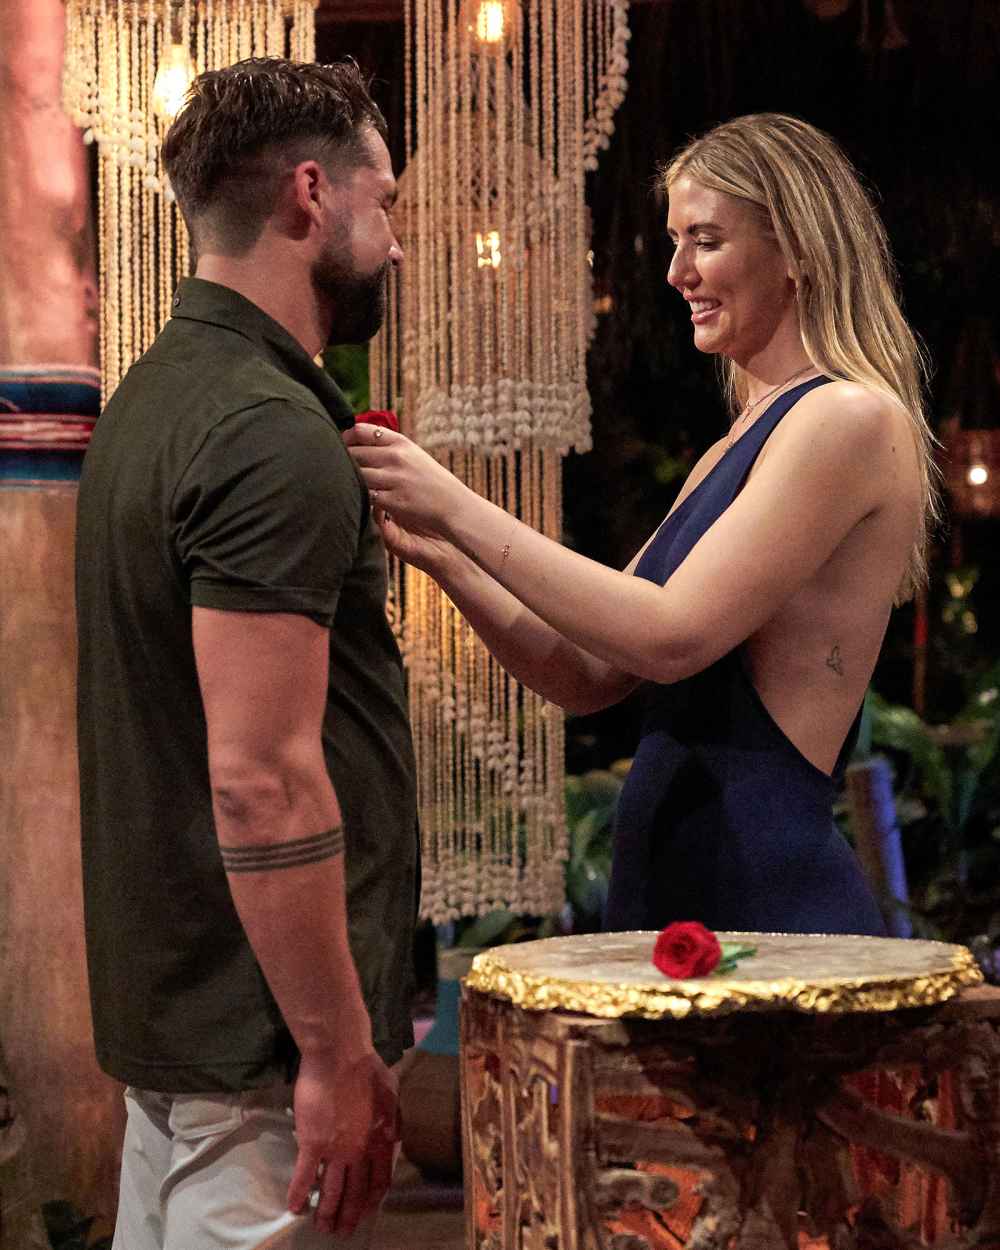 Michael Allio Danielle Maltby Bachelor Nation Weighs In on Convenient Story Line